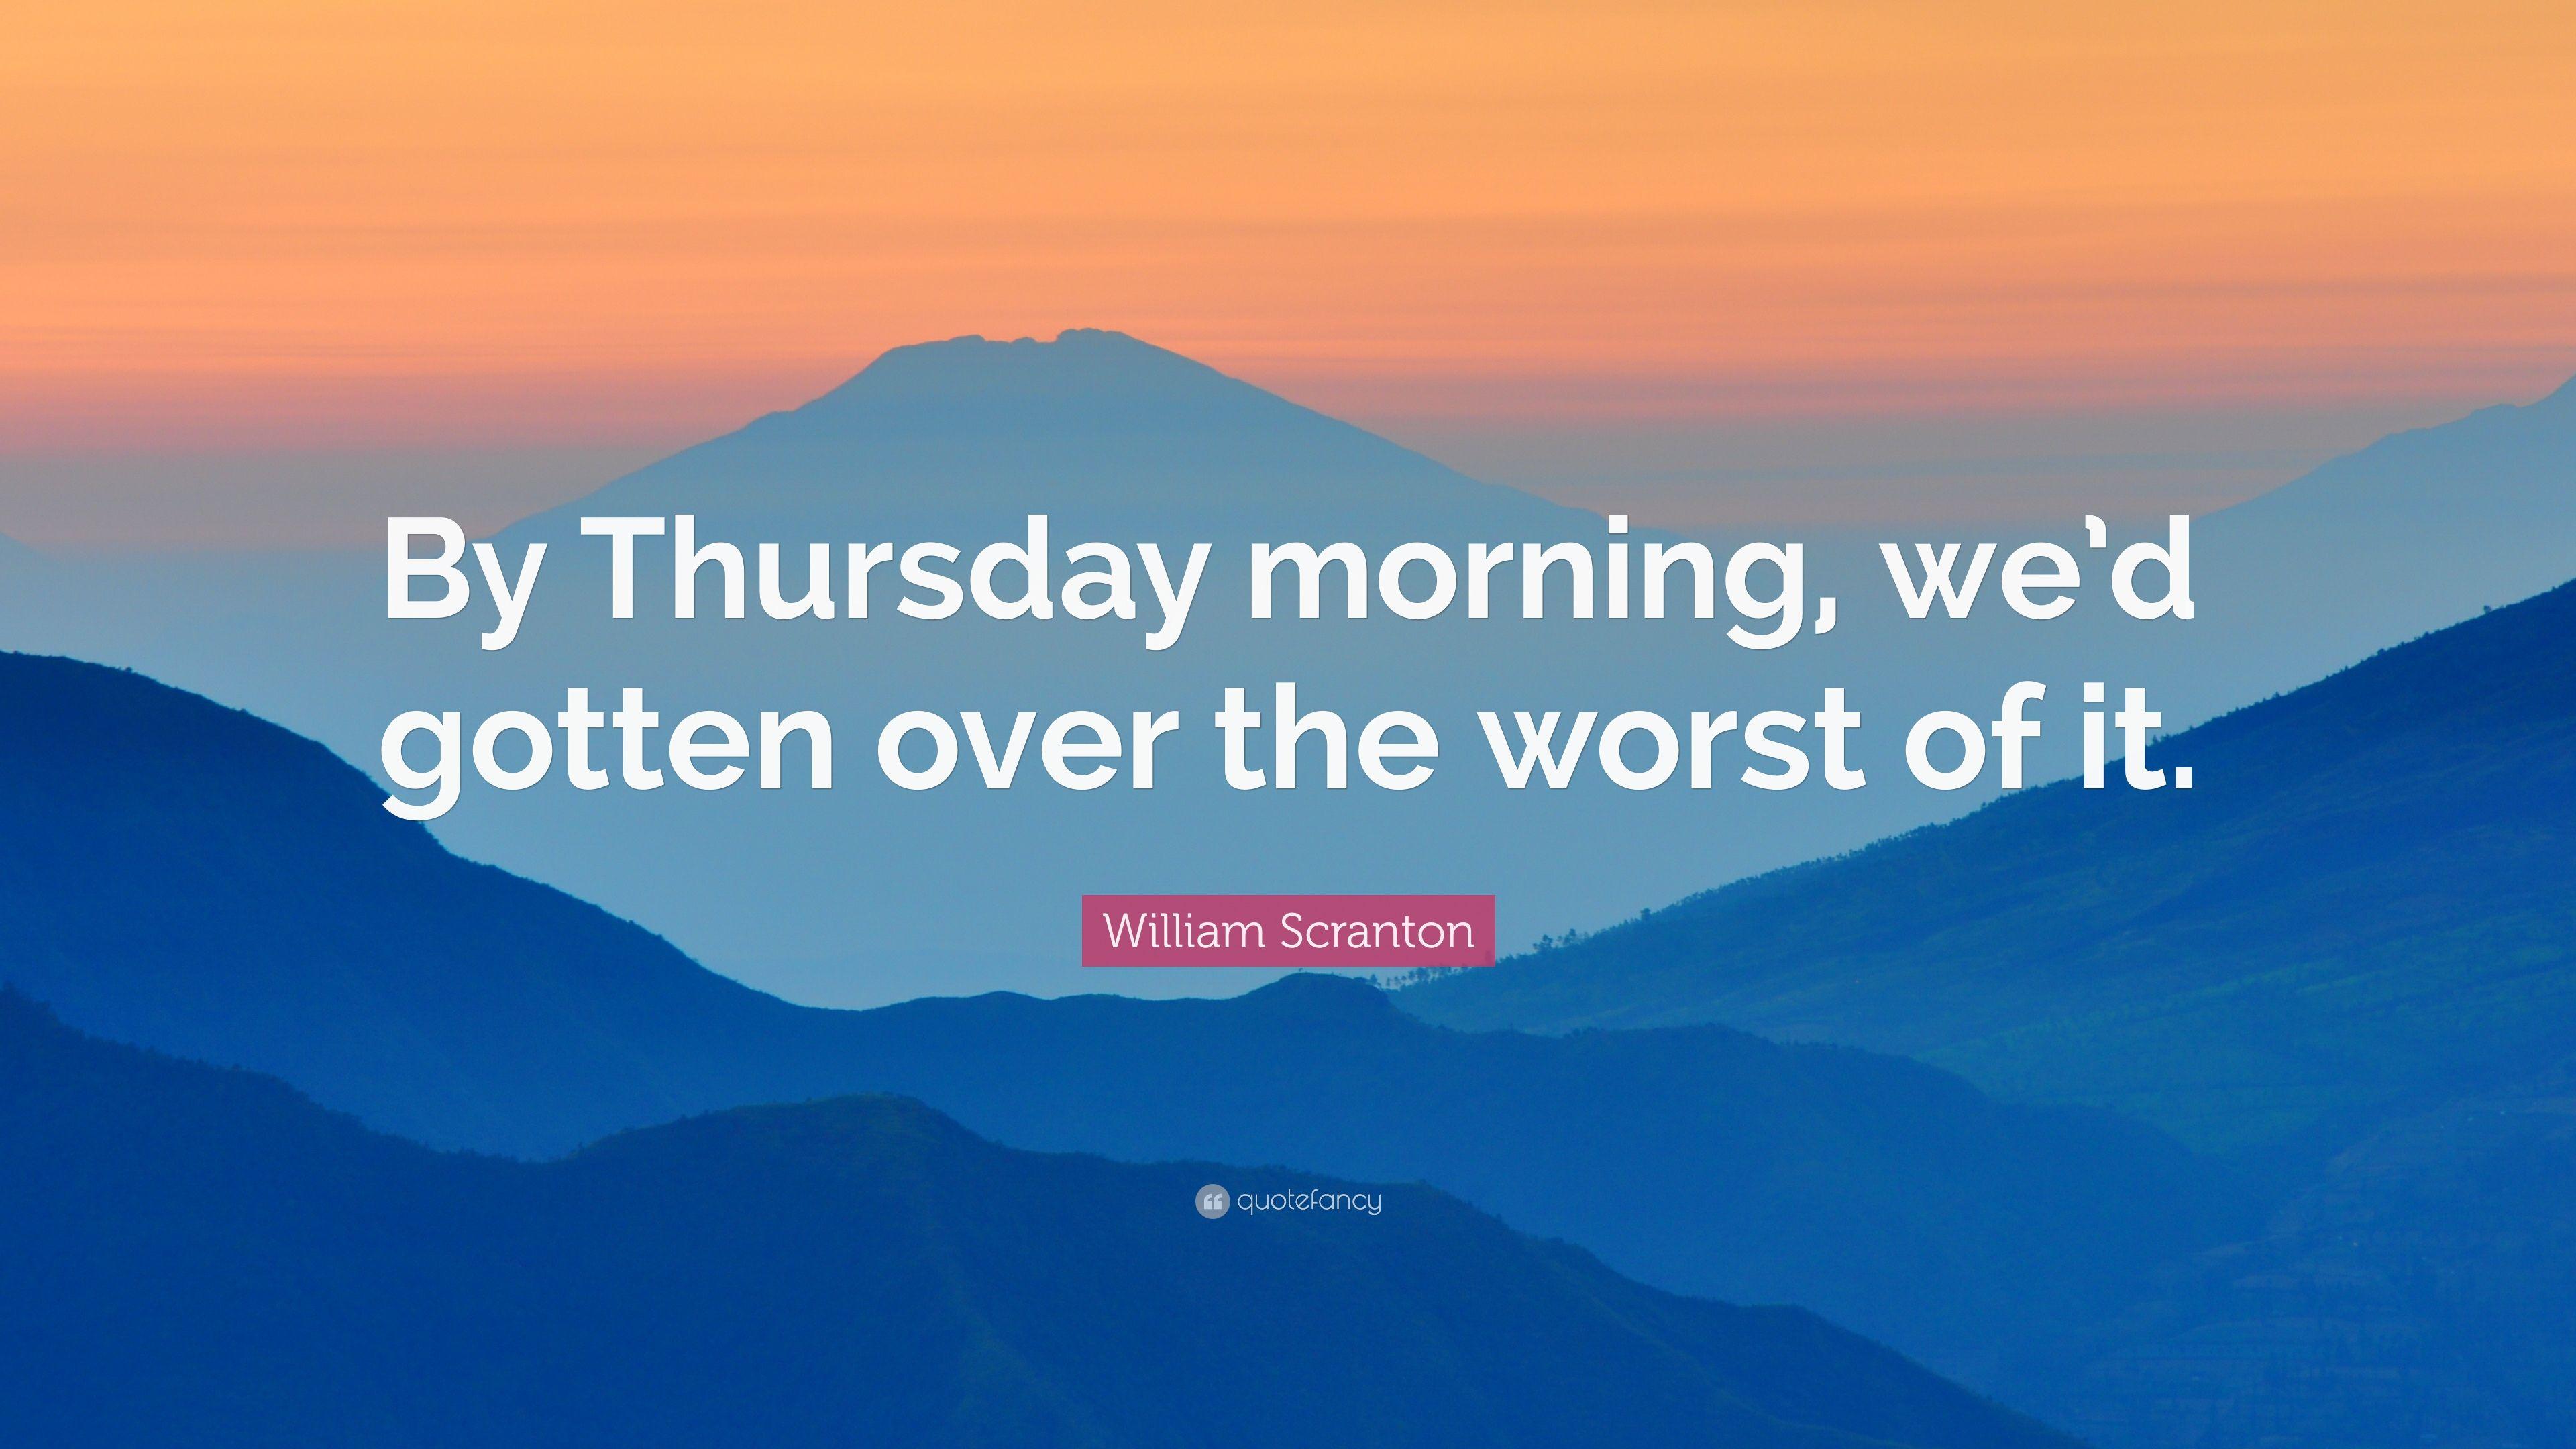 William Scranton Quote: “By Thursday morning, we'd gotten over